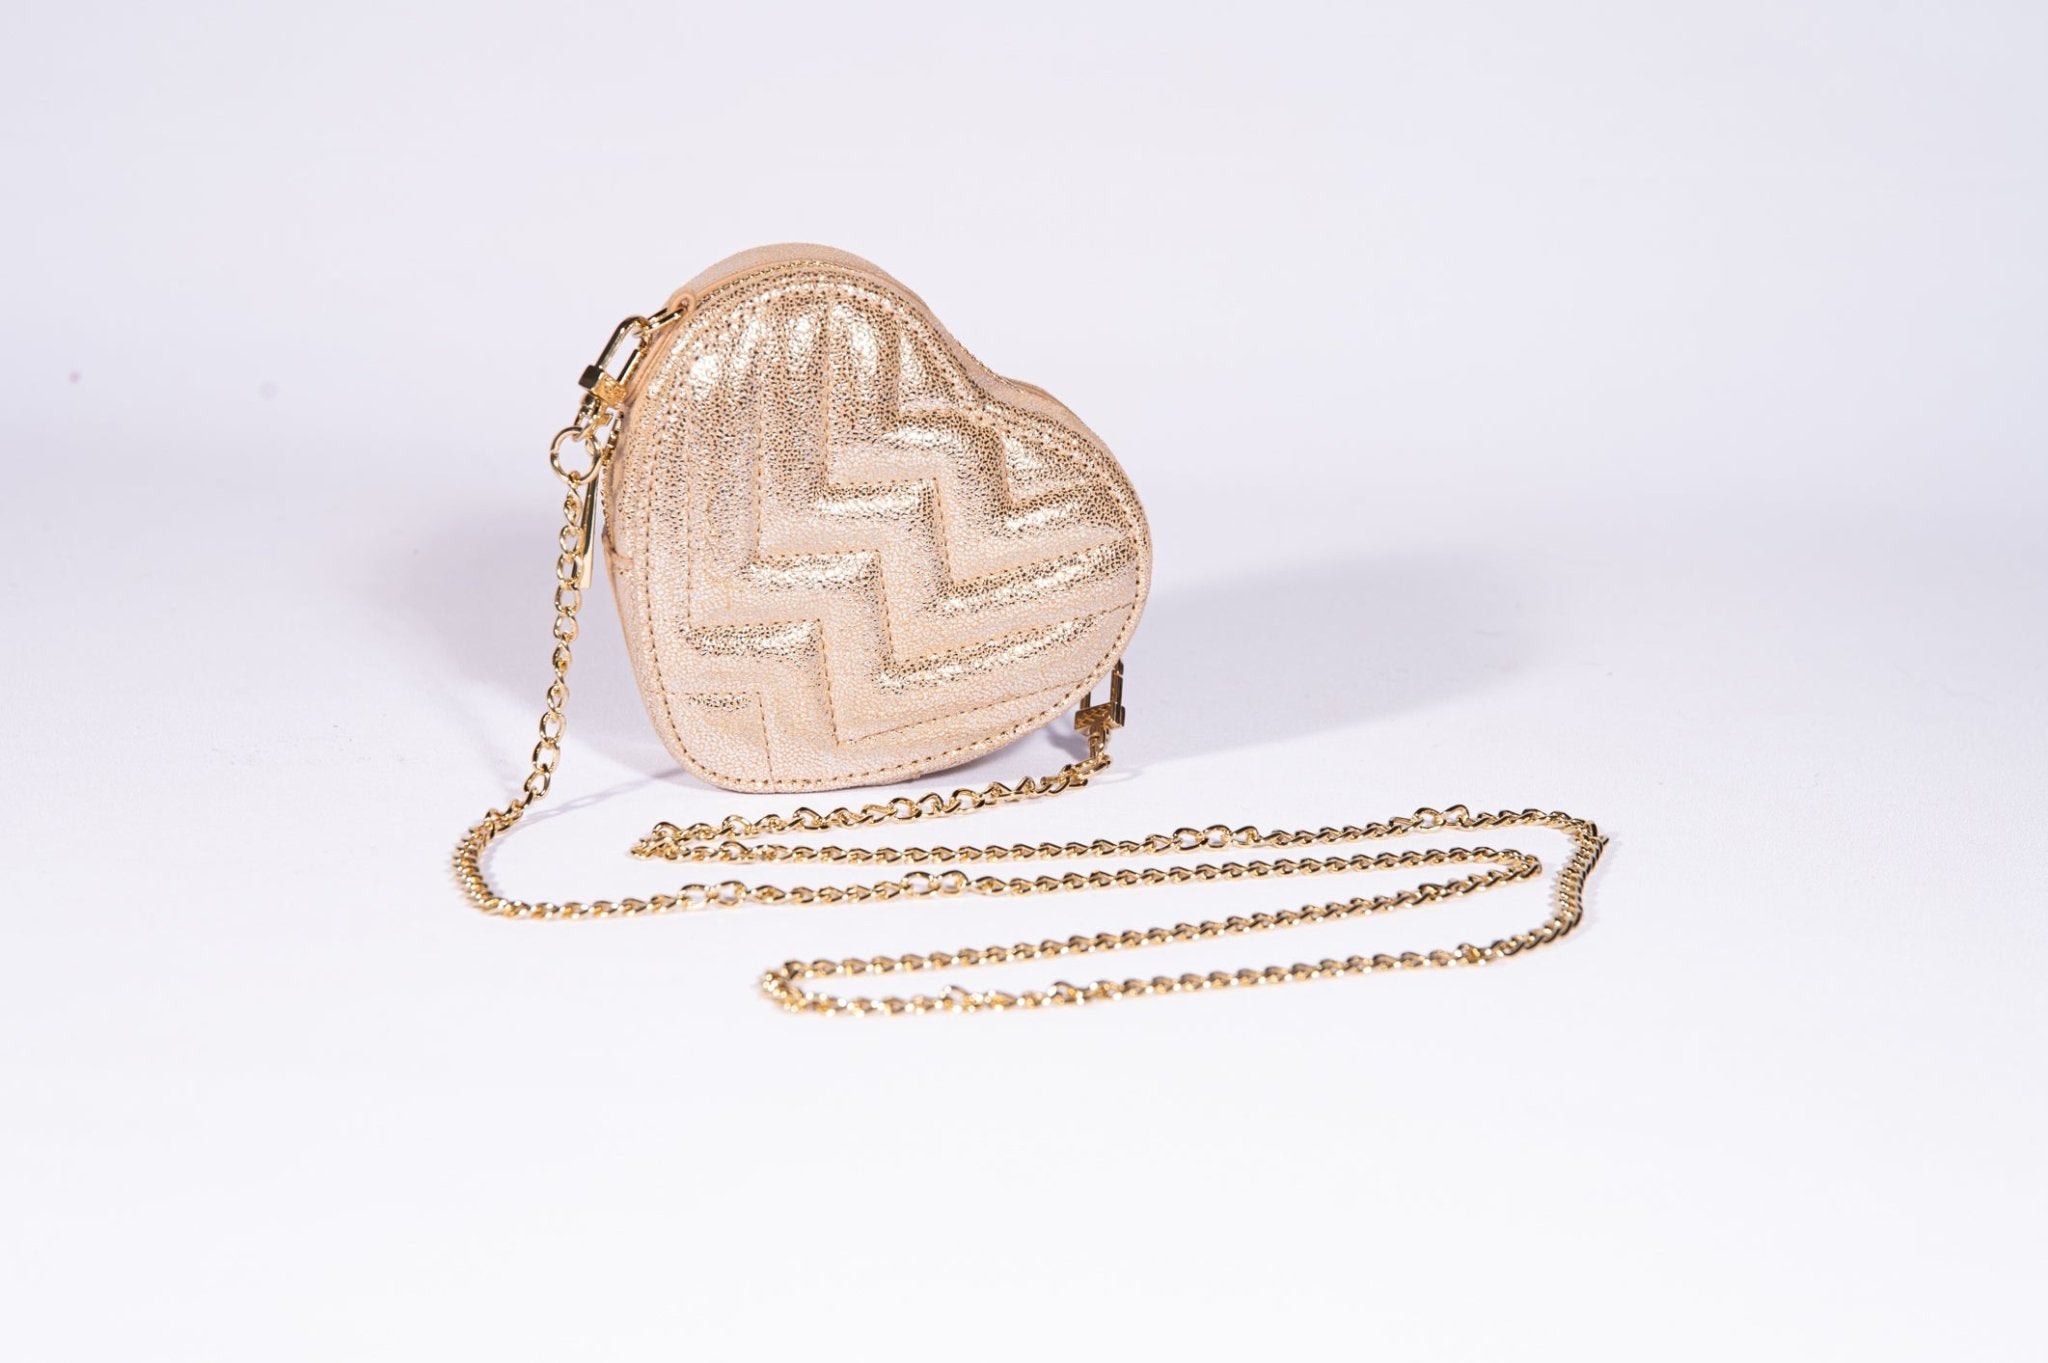 Leather Heart Bag Champagne by Weat - Peggell